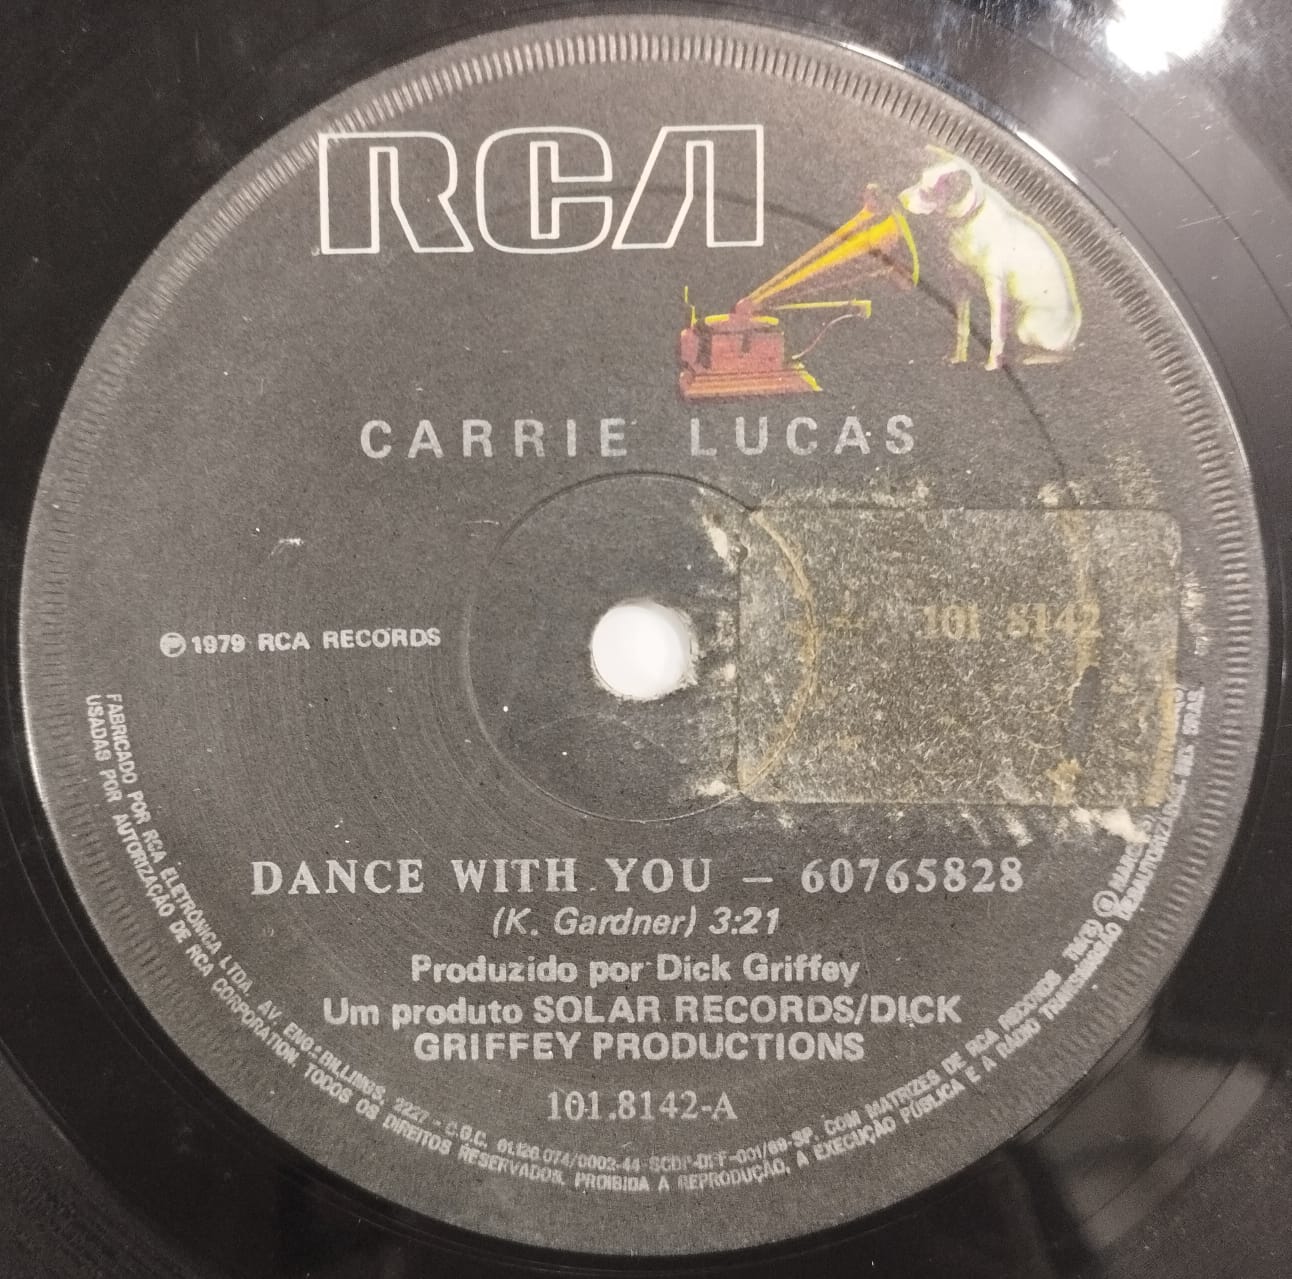 Carrie Lucas ‎– Dance With You (Compacto)